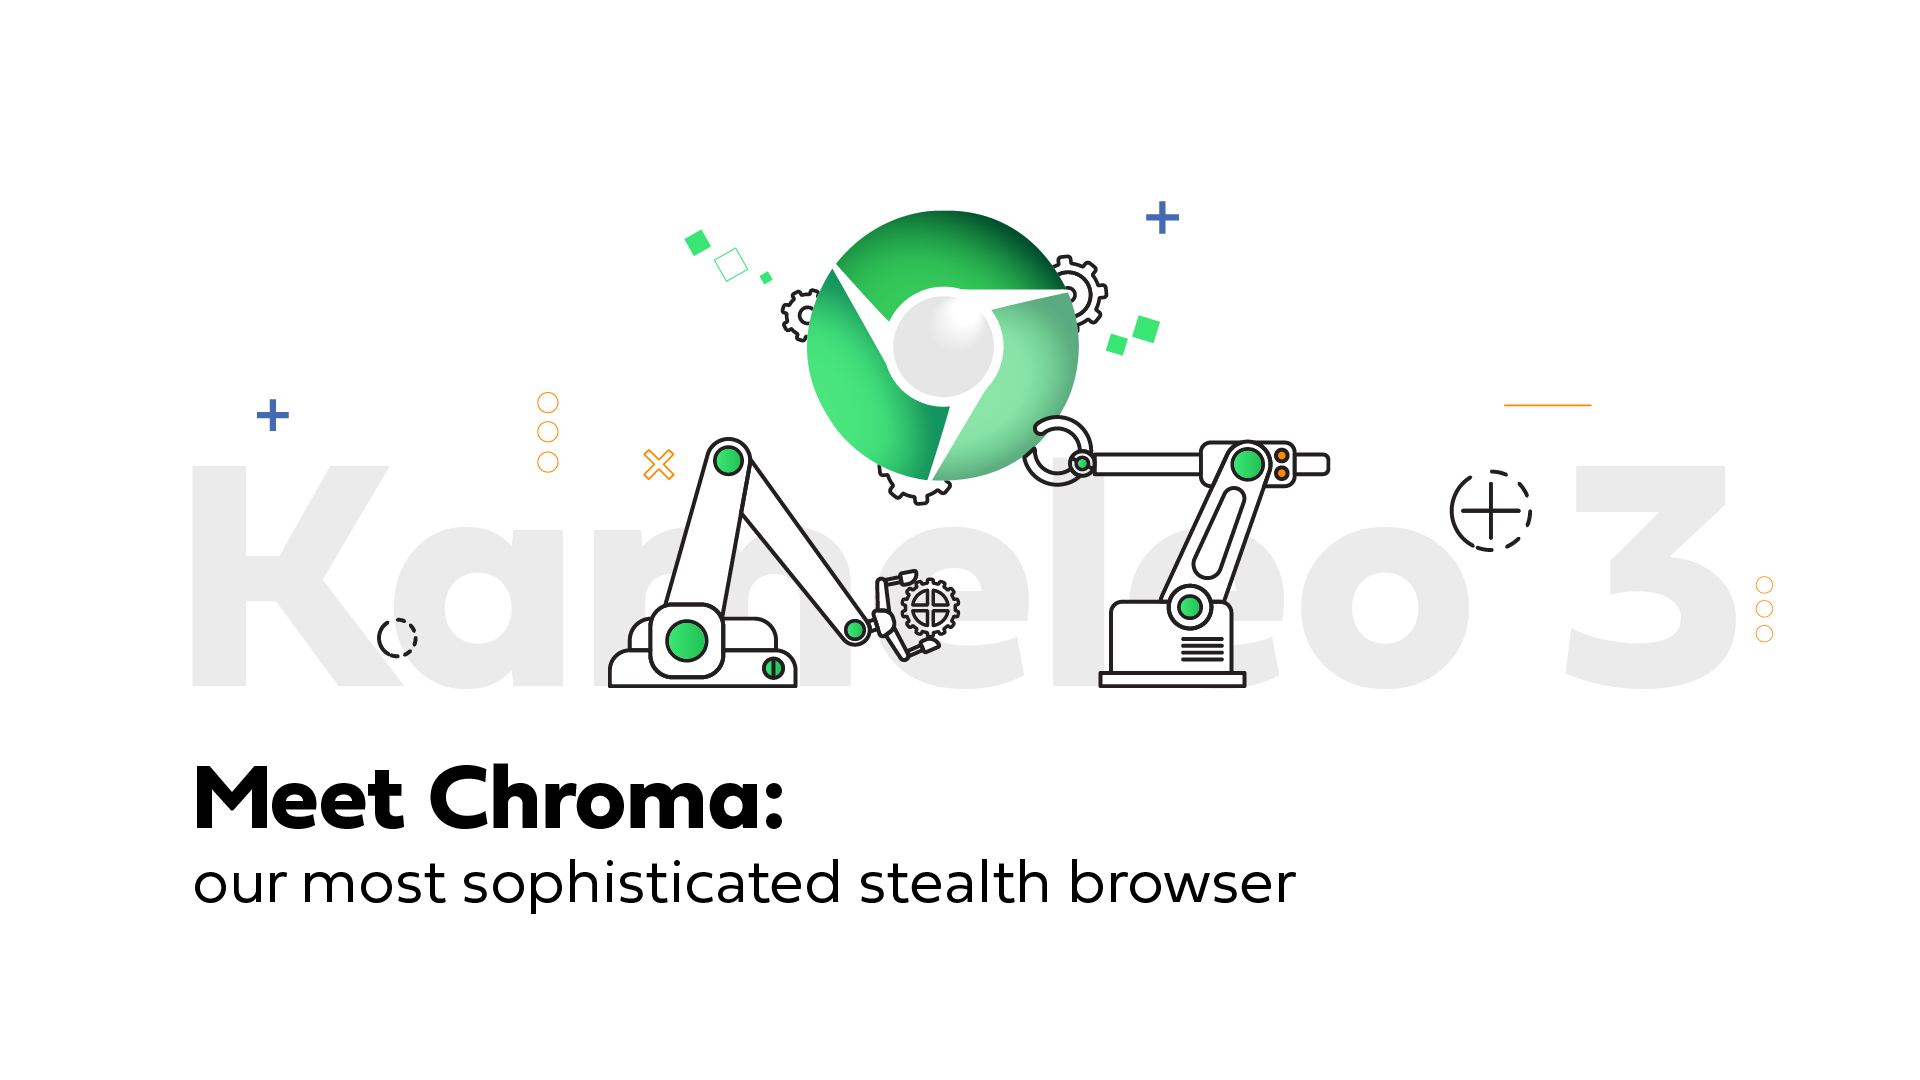 Meet Chroma, our most sophisticated stealth browser (yet)